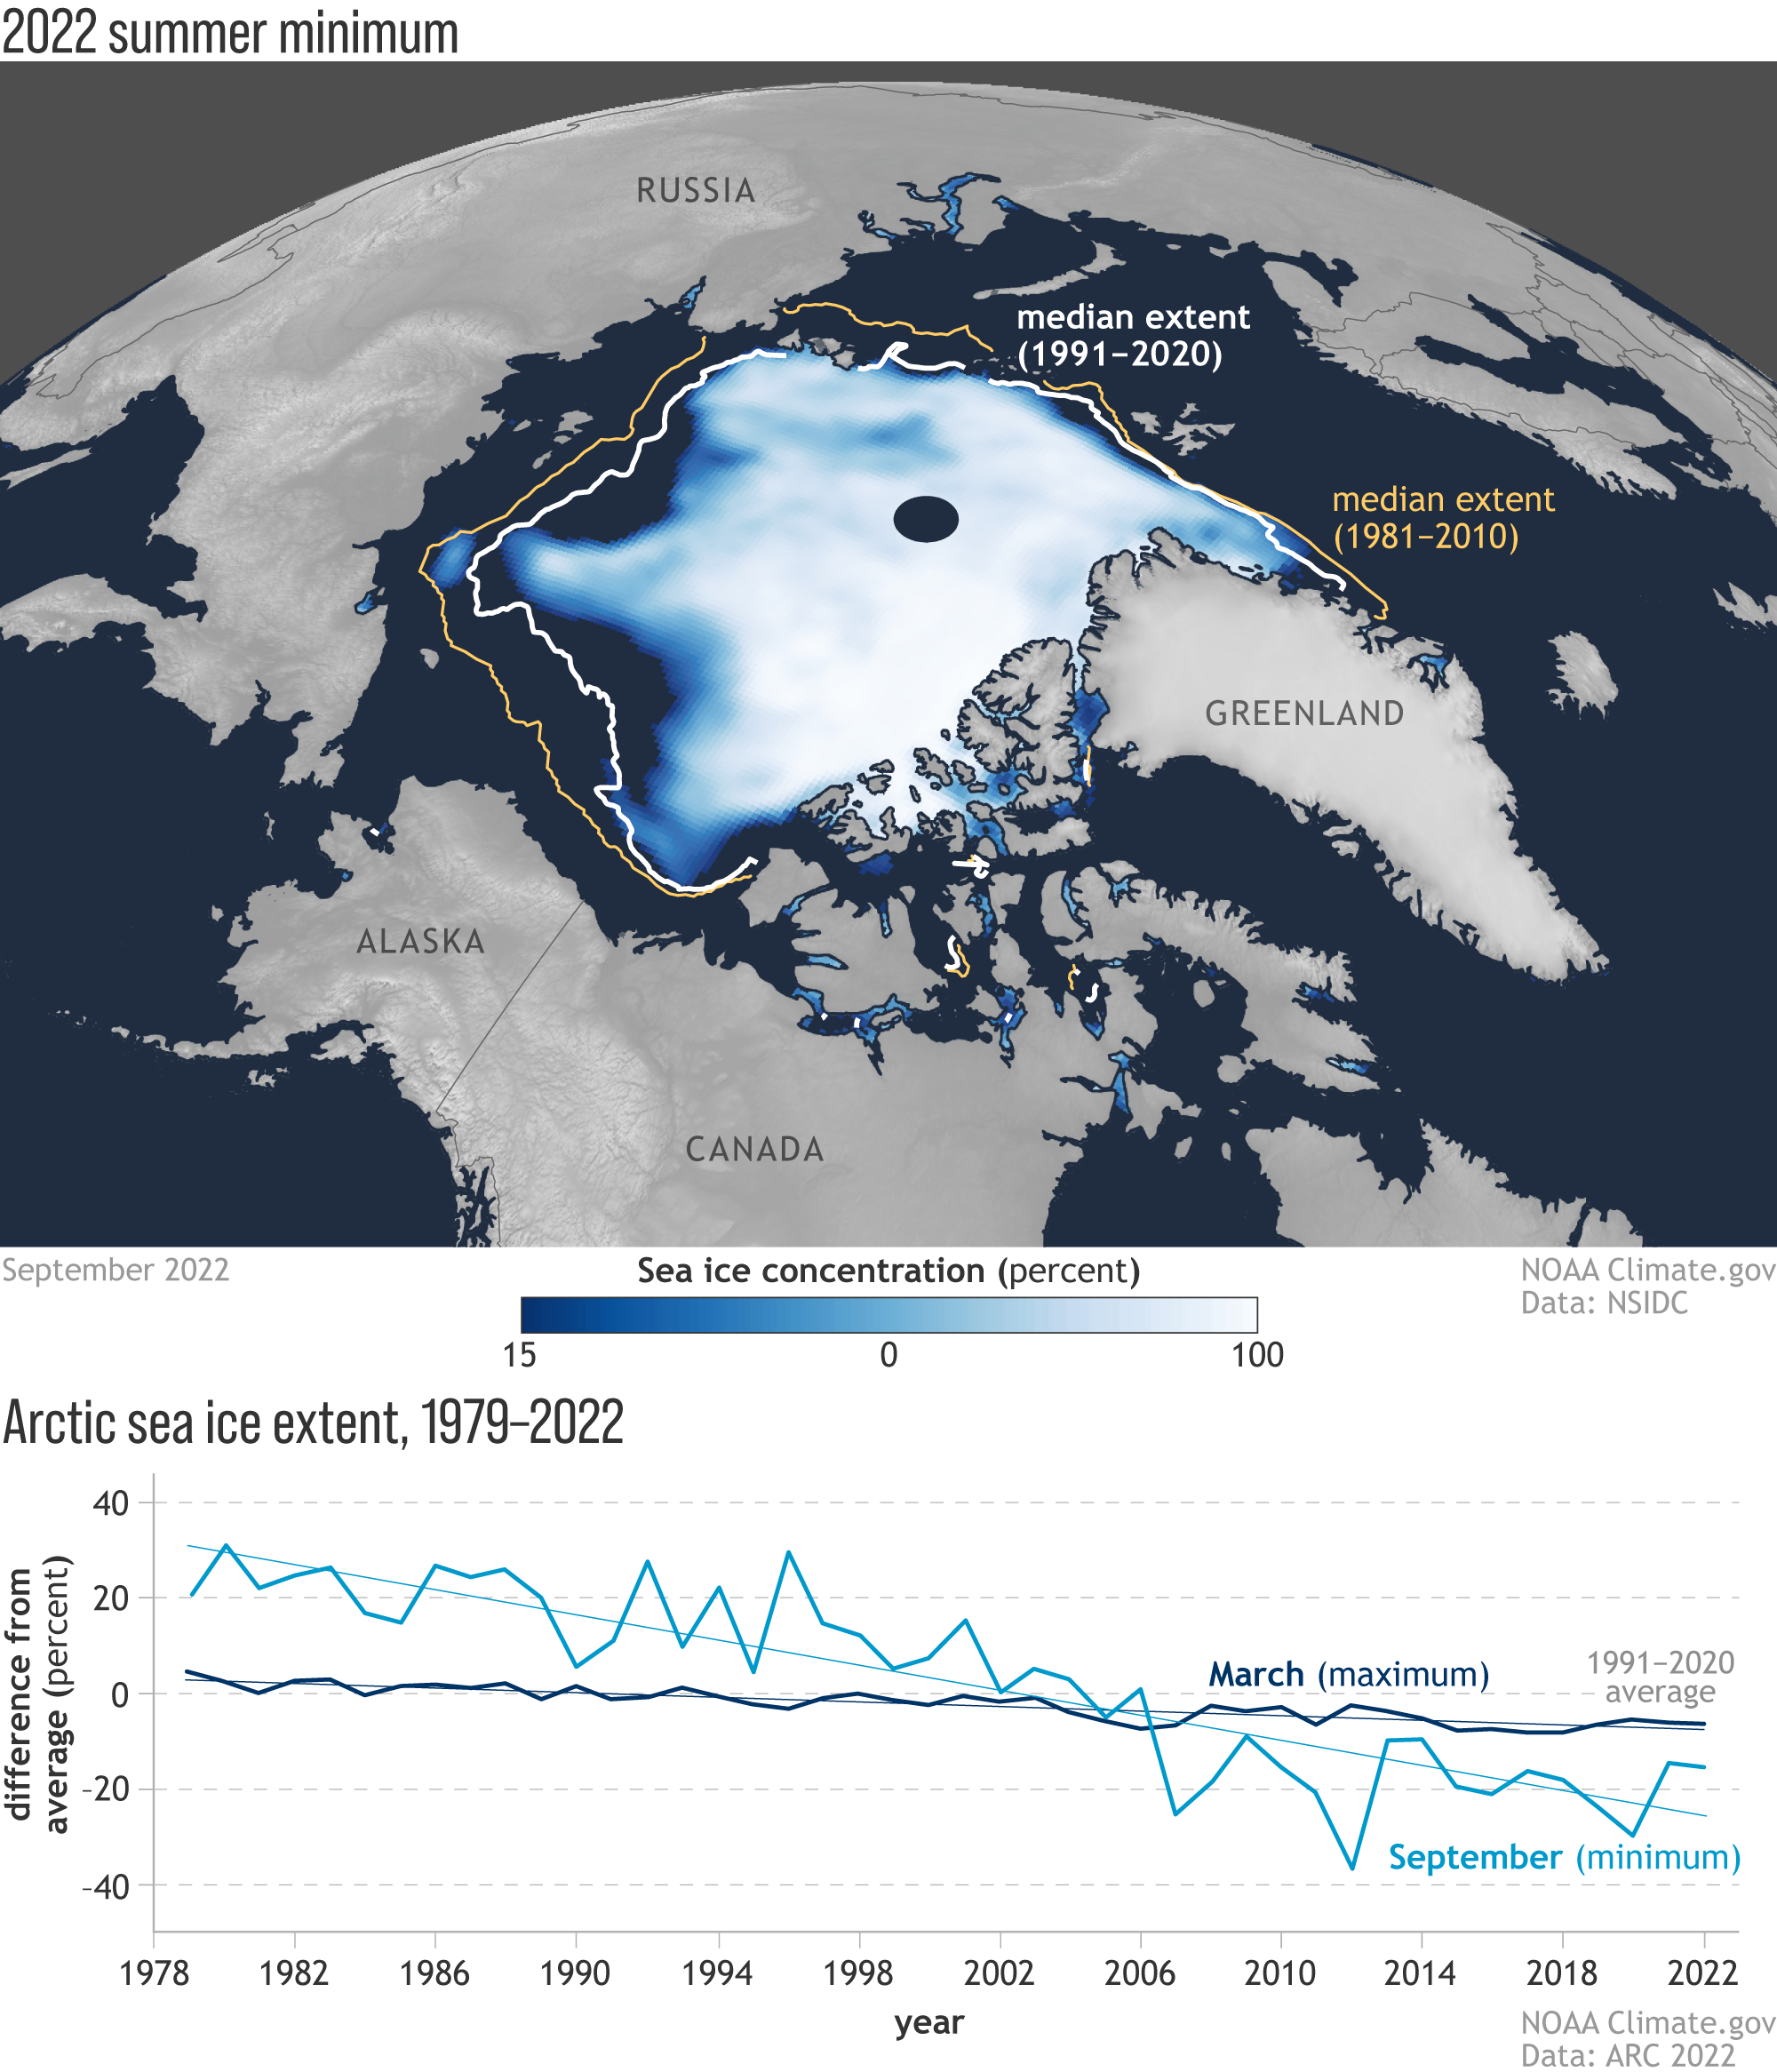 Late summer sea ice concentrations for the entire Arctic in September 2022.